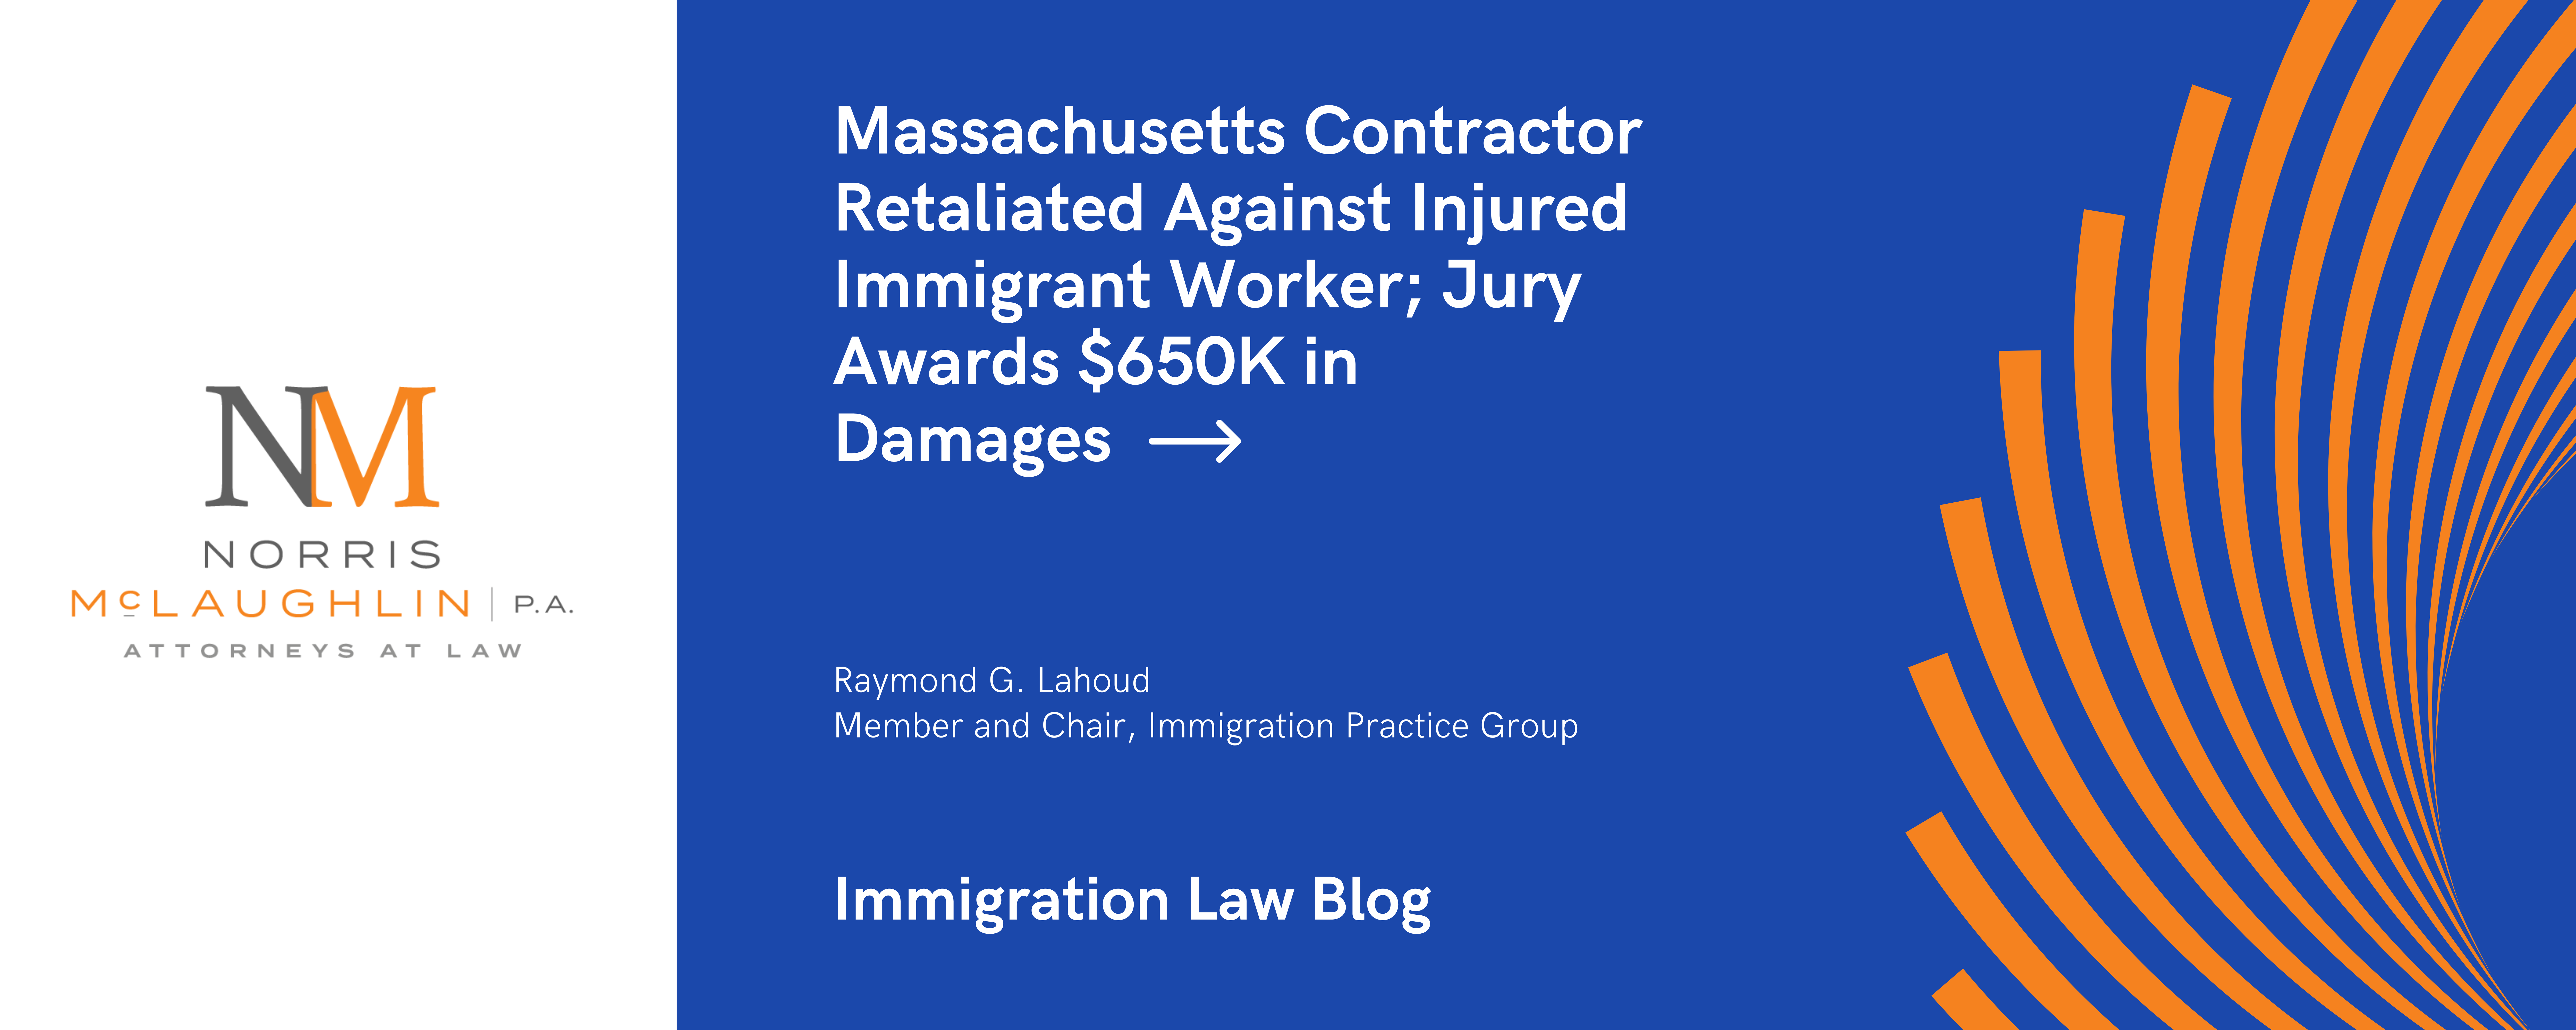 Massachusetts Contractor Retaliated Against Injured Immigrant Worker; Jury Awards $650K in Damages